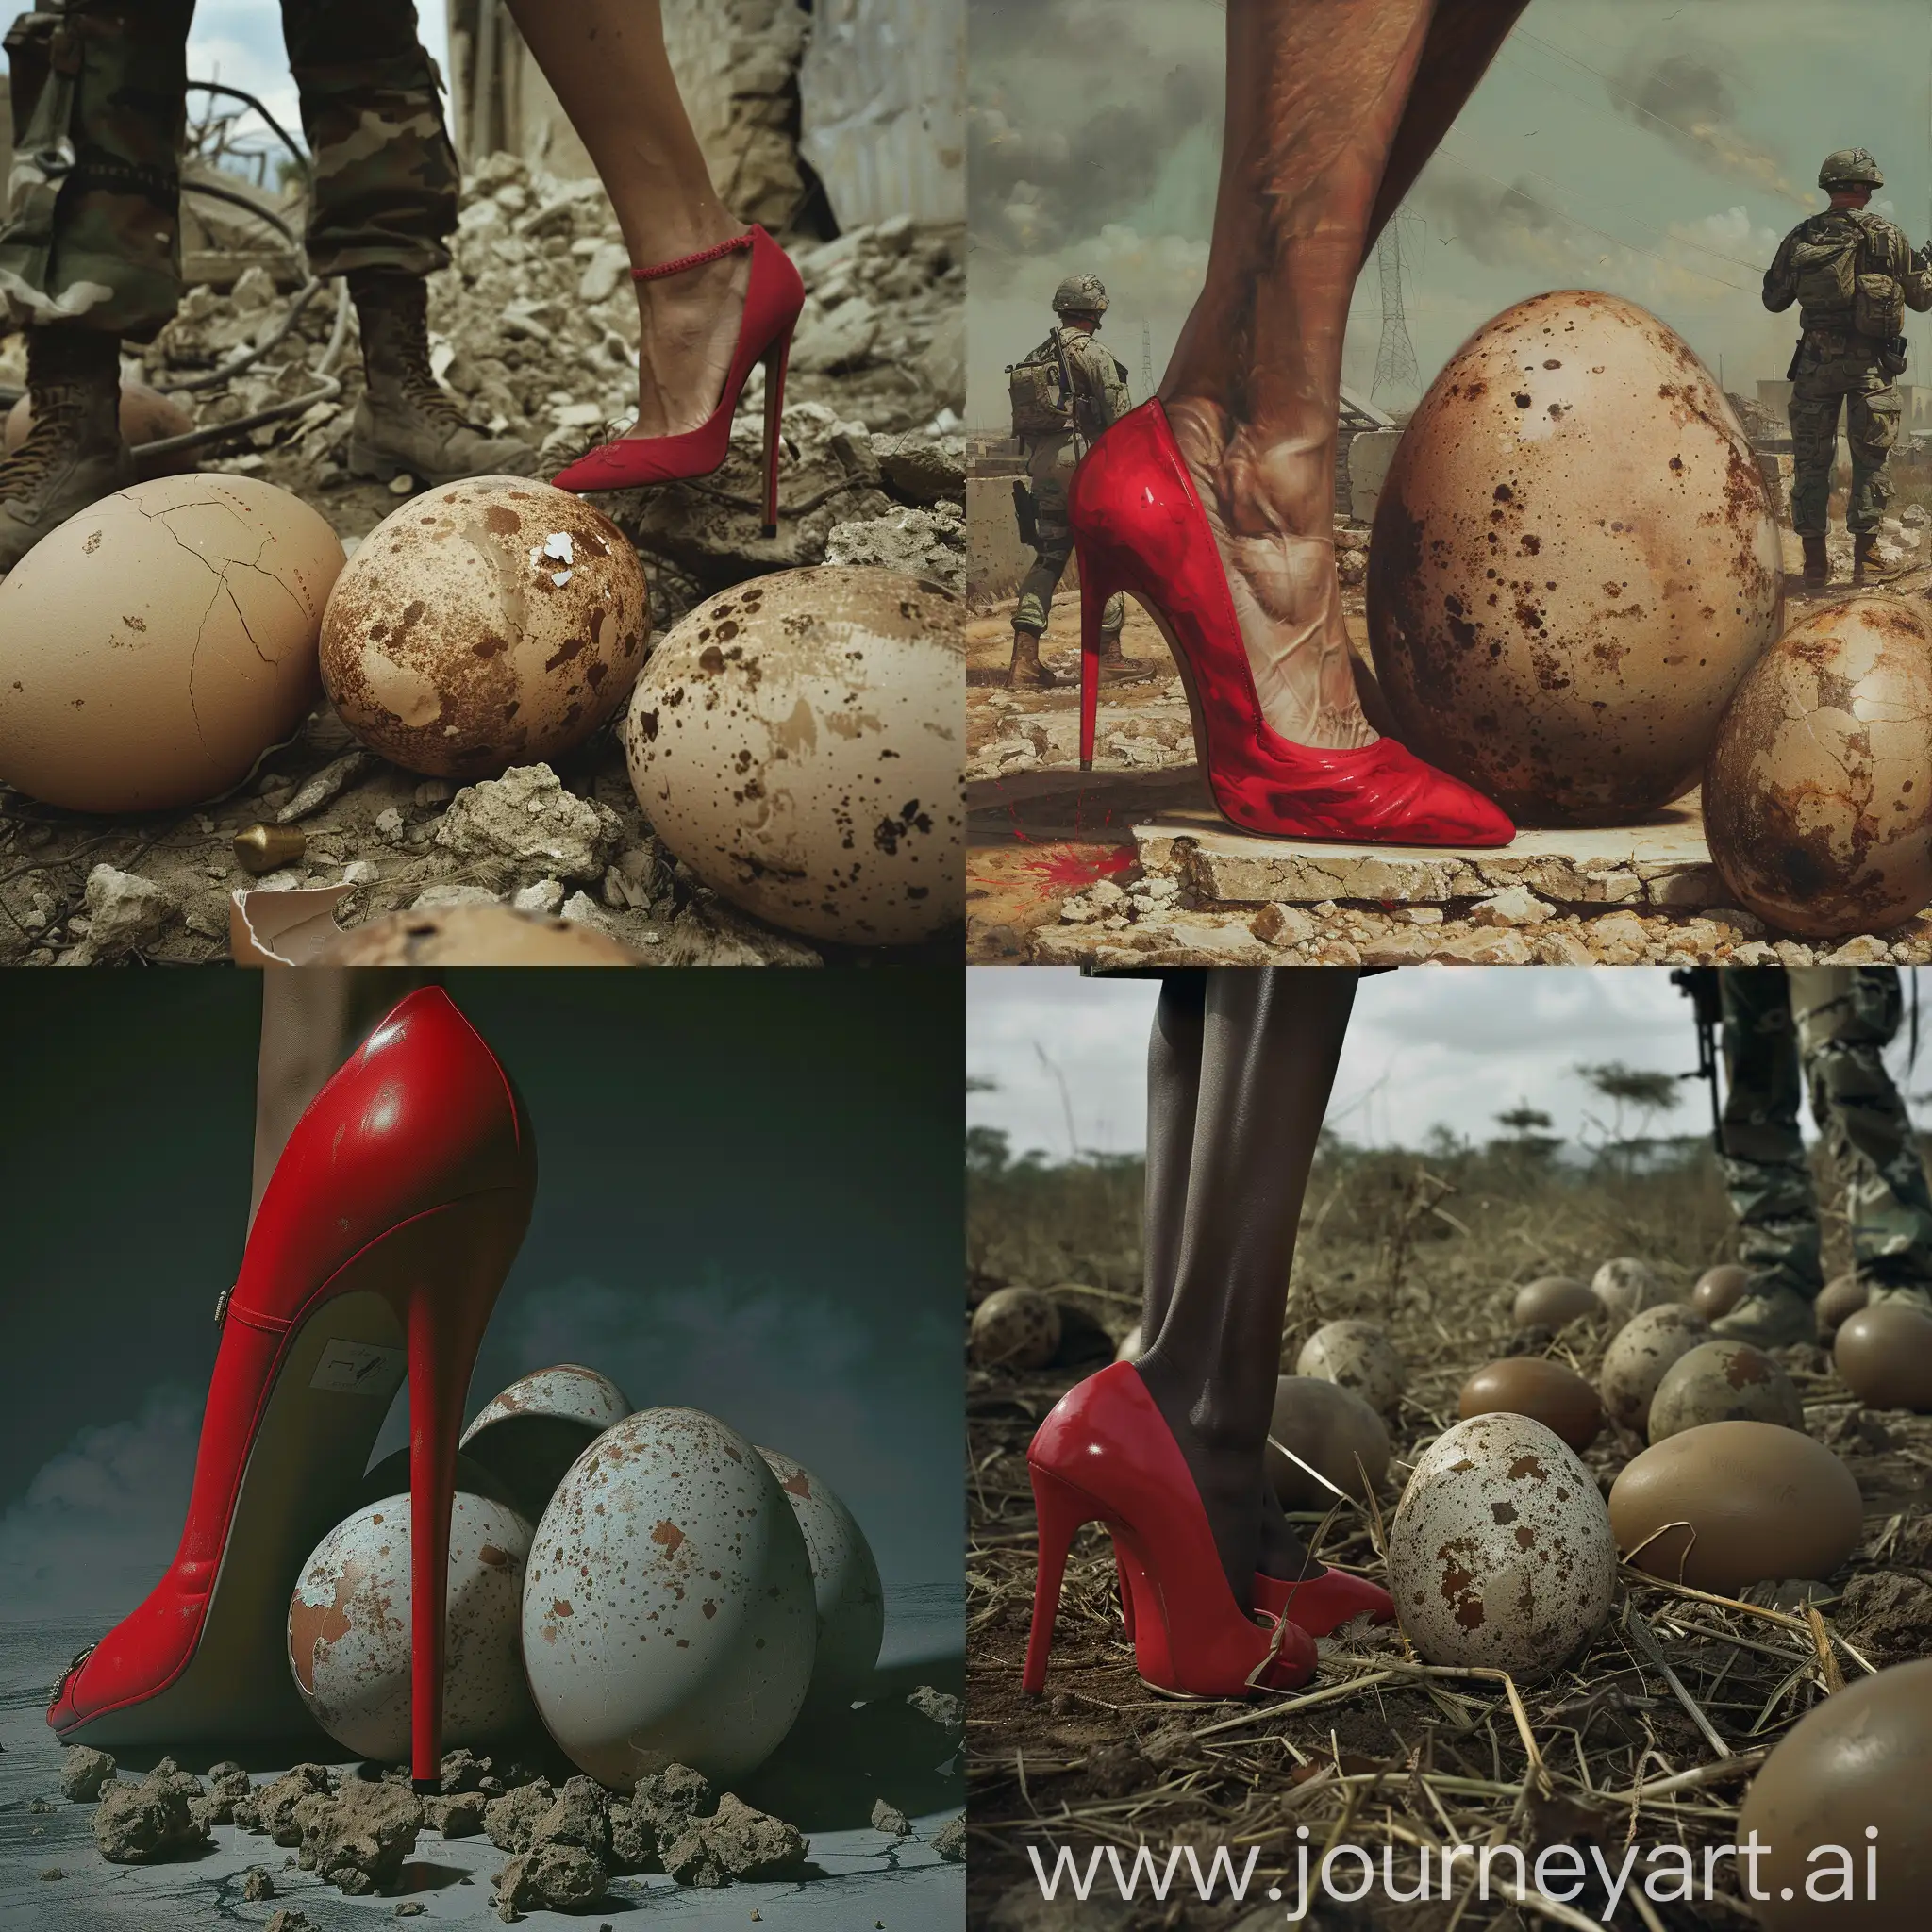 Civilians-Protecting-Enormous-Eggs-Under-Red-High-Heel